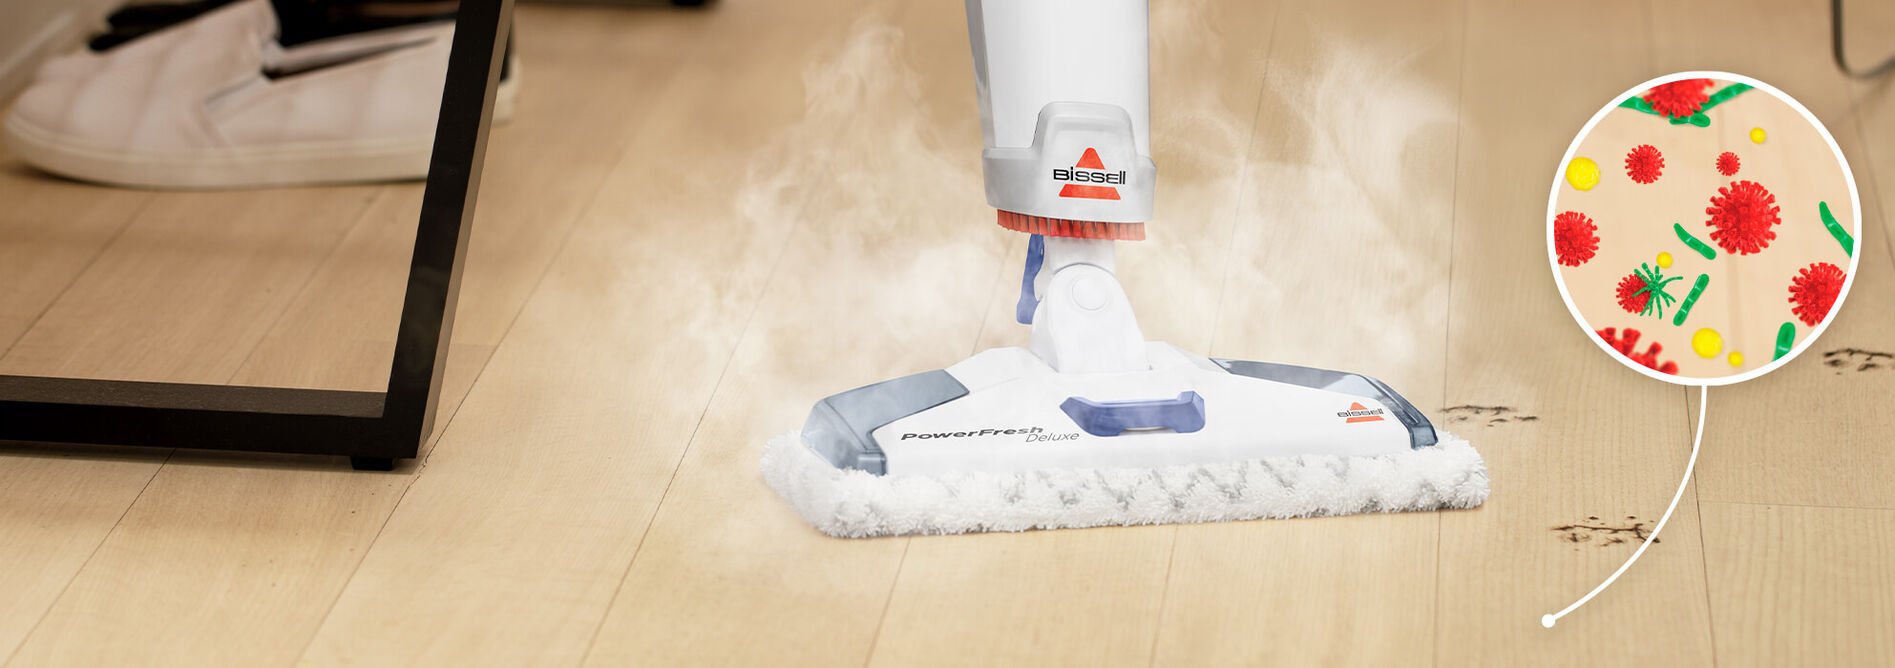 Bissell's Power Fresh Steam Mop Can Sanitize Your Kitchen Floors.